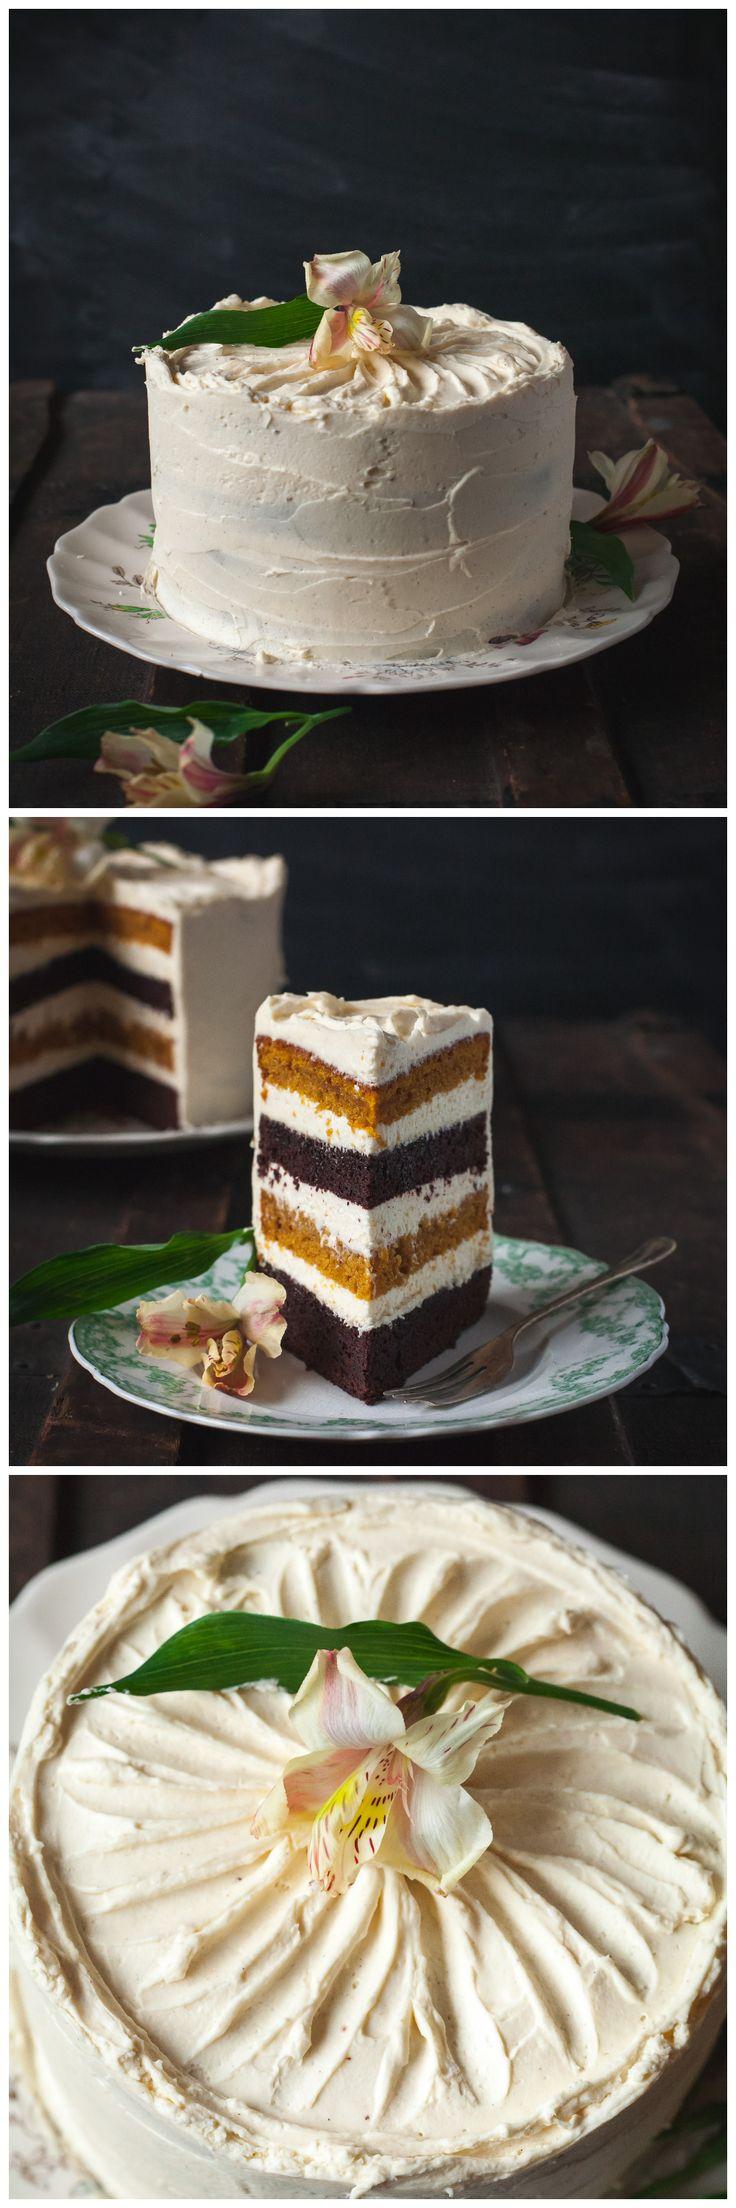 Wedding - Spiced Pumpkin And Chocolate Cake With Maple Cinnamon Mascarpone Frosting